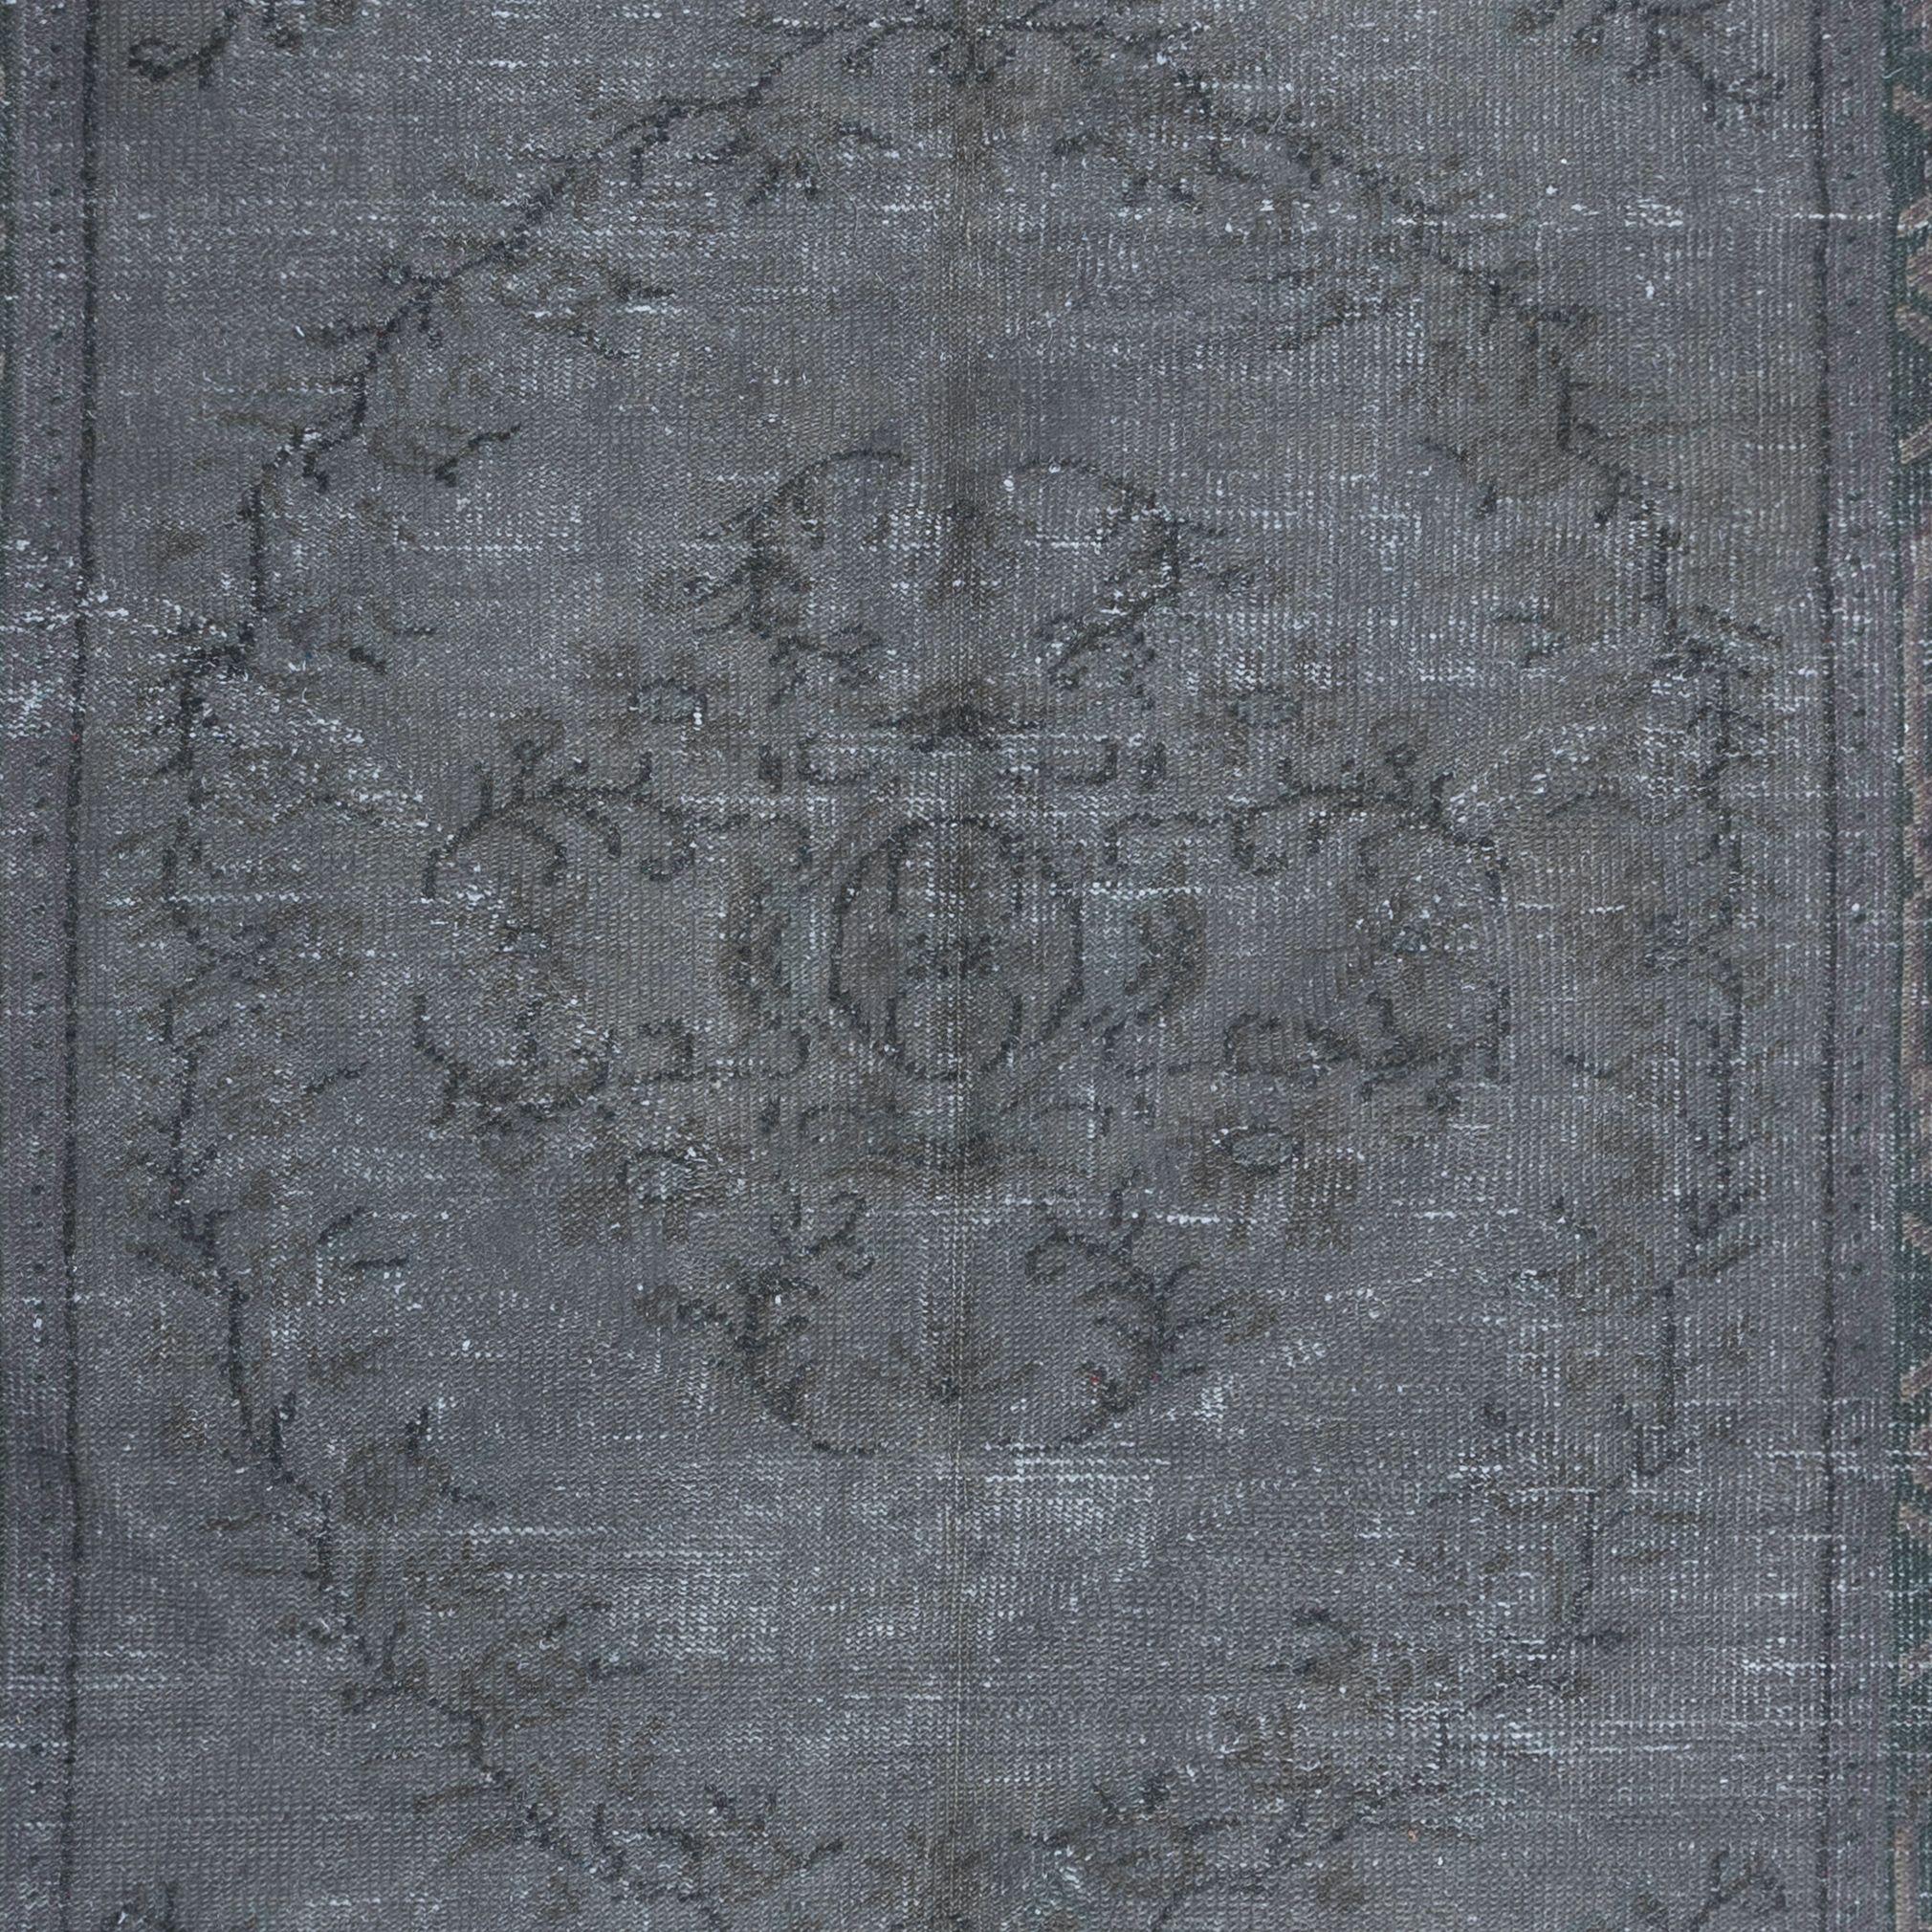 5.4x8.7 Ft Contemporary Hand Knotted Wool Gray Area Rug, Turkish Upcycled Carpet In Good Condition For Sale In Philadelphia, PA